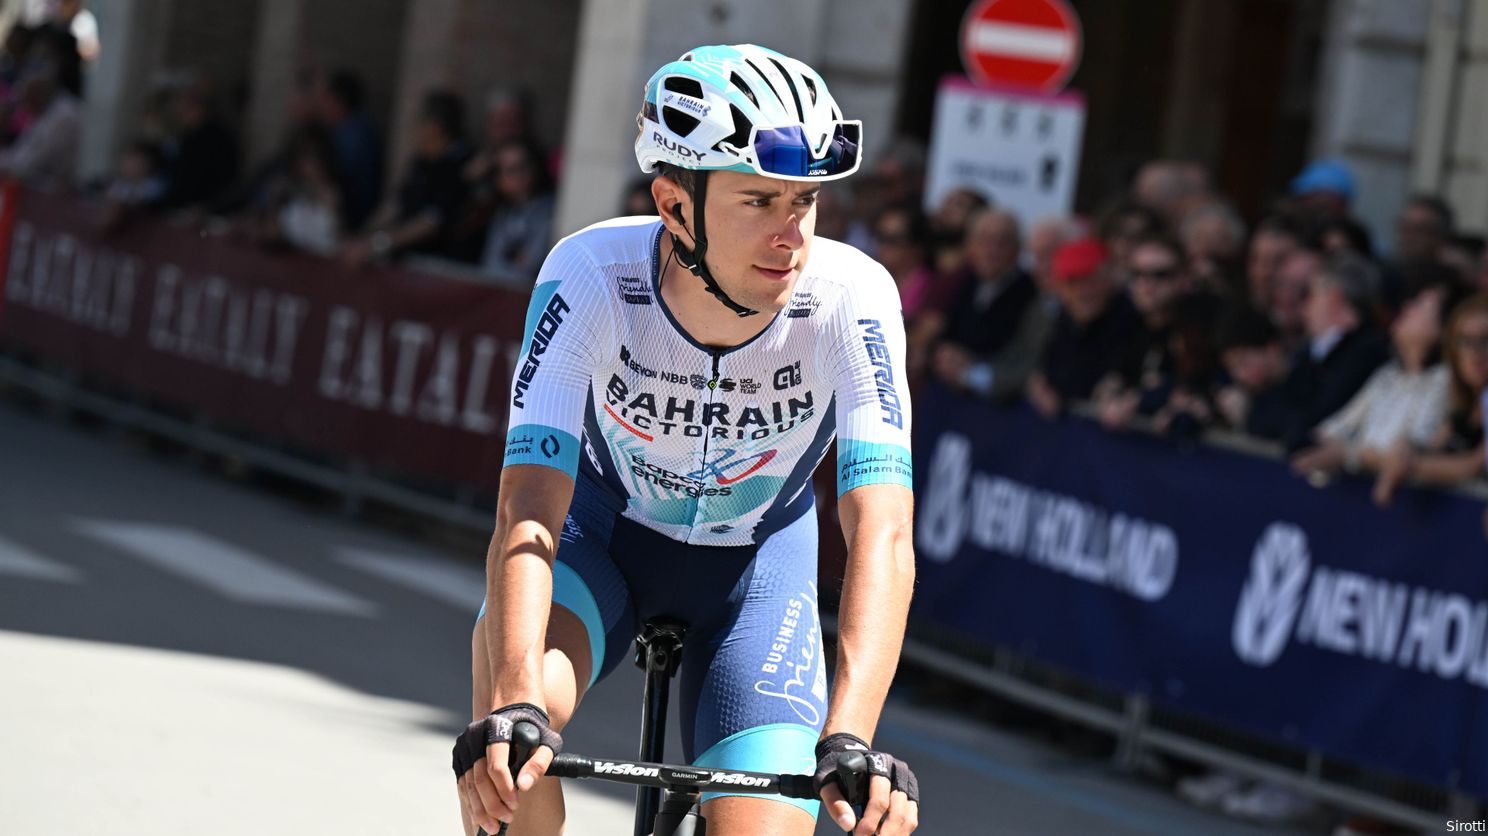 Uijtdebroeks' withdrawal decapitates Visma | Lease a Bike's hopes as well as the young rider jersey battle, according to Arensman